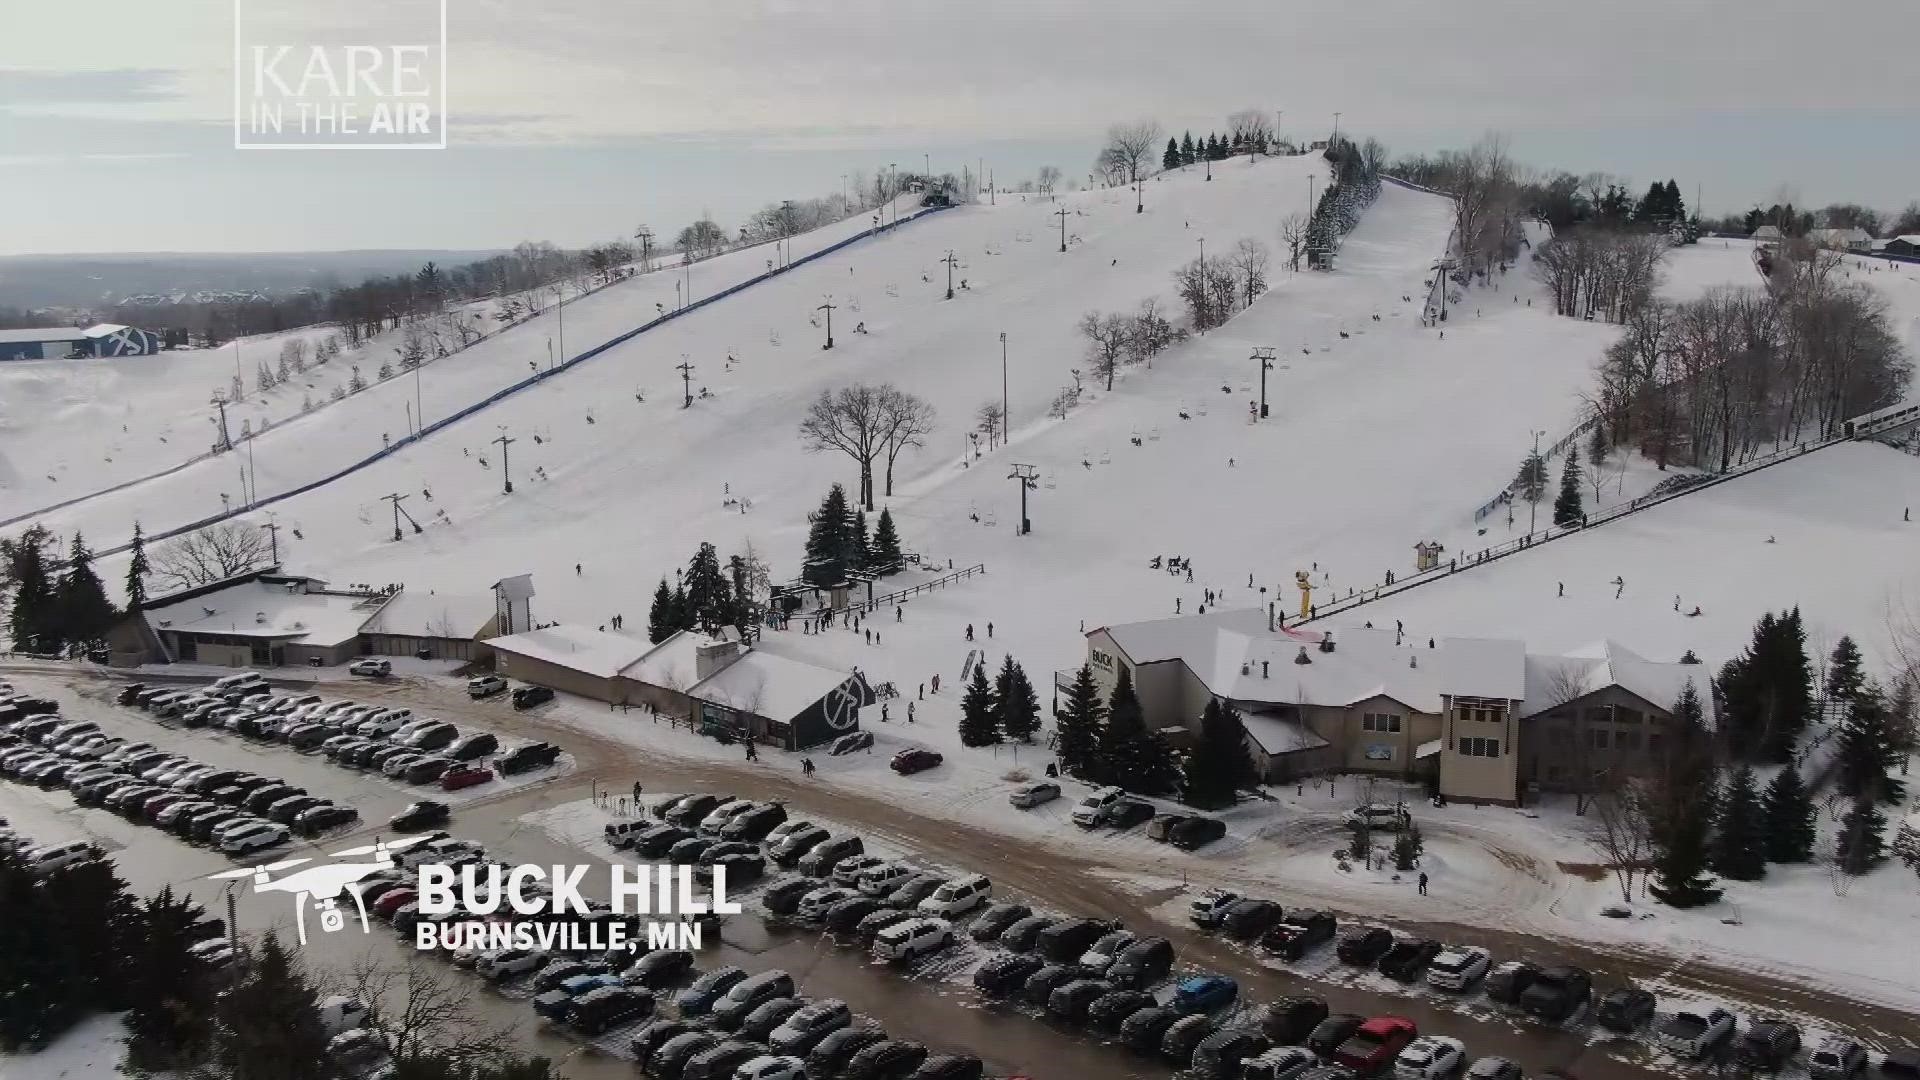 Our drone series continues with a bird's eye look at a small but significant suburban ski hill with quite a history.